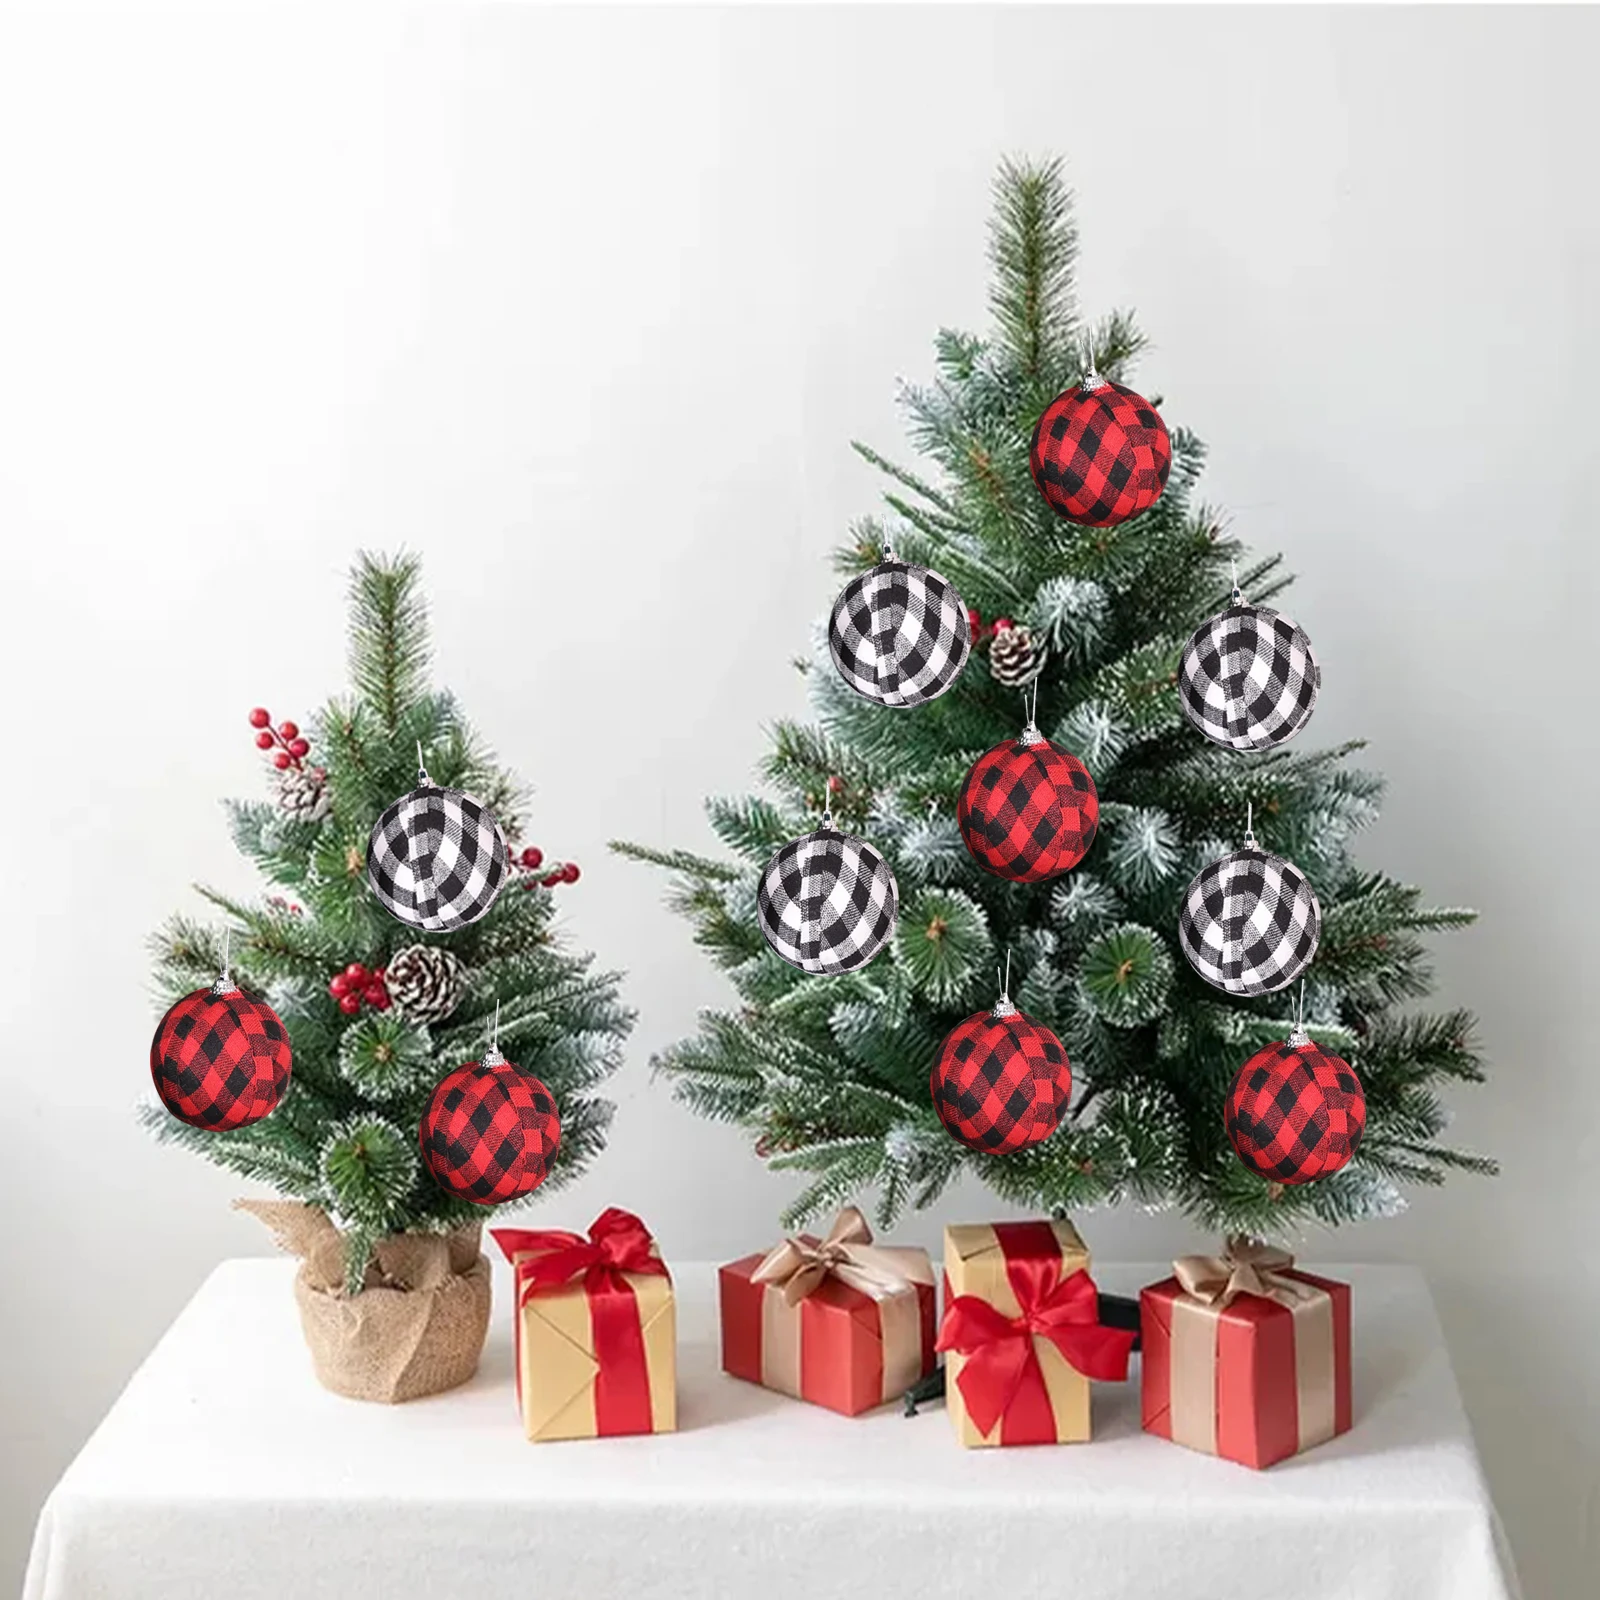 7cm Xmas Ornaments Pendant Red White Black Plaid Christmas Ball Hanging Decoration Crafts Home Festival Party DIY Decor mini artificial foam feather red birds fake simulation bird model home outdoors garden christmas party ornaments diy decoration